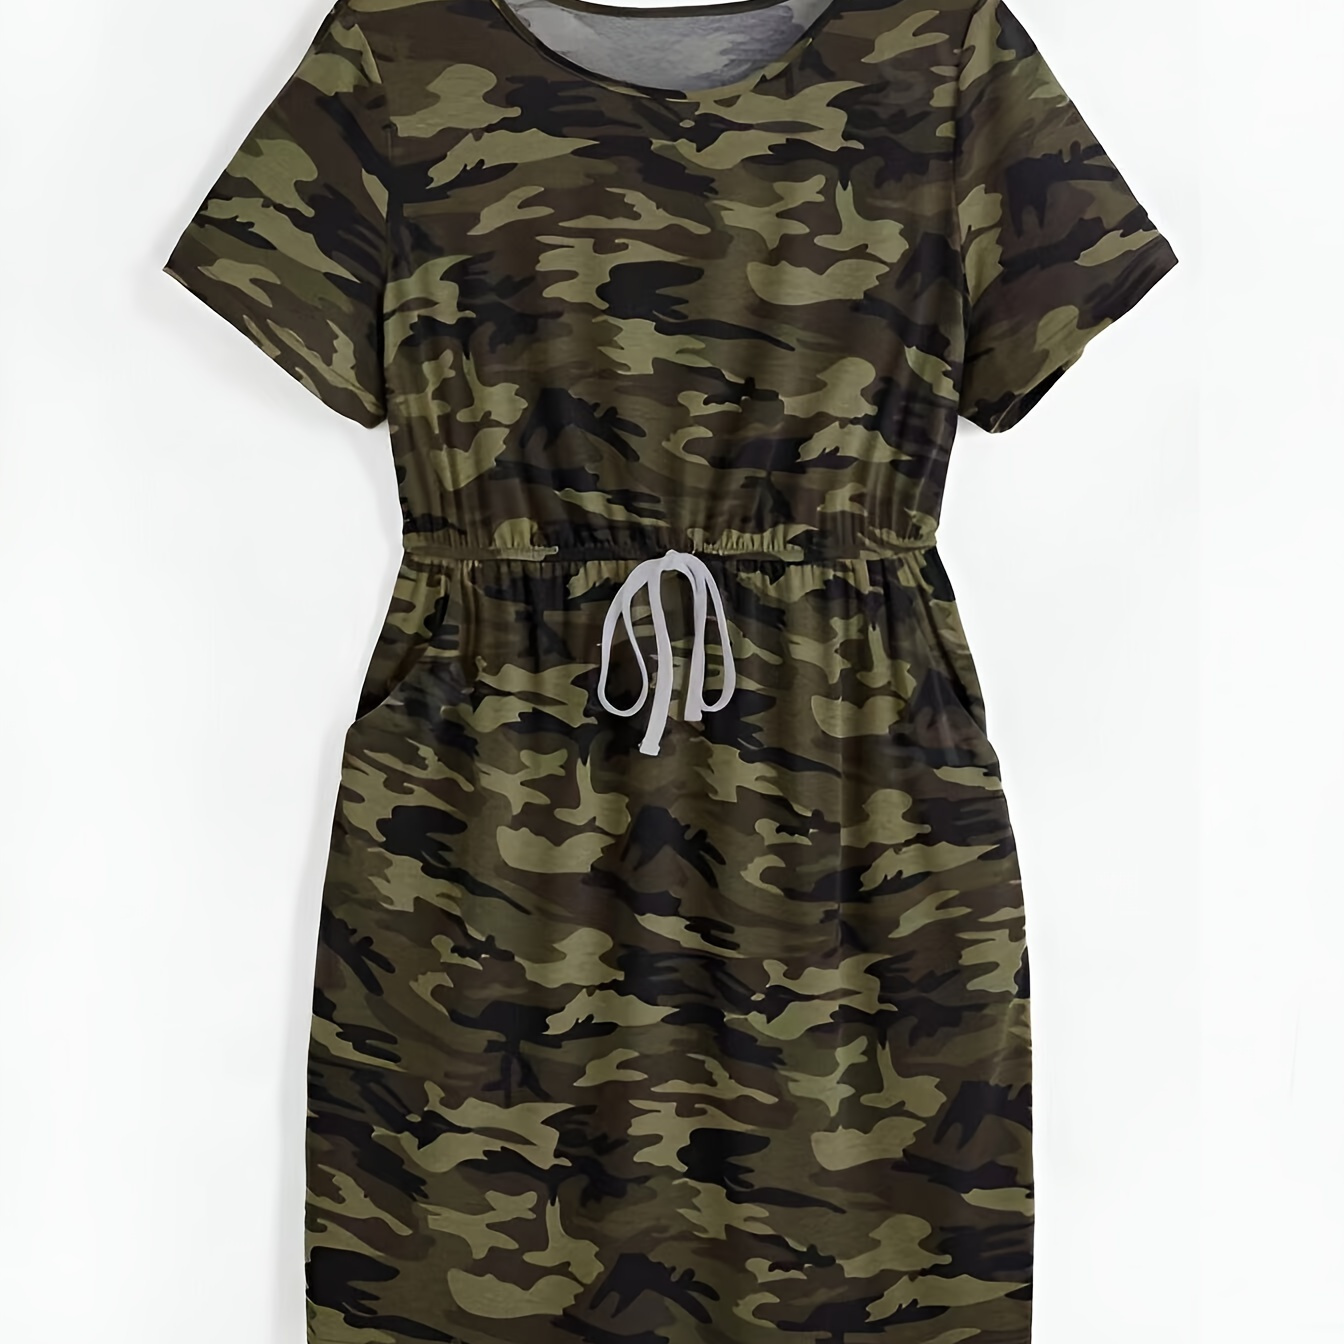 

Plus Size Camo Print Dress, Casual Short Sleeve Crew Neck Dress For Spring & Summer, Women's Plus Size clothing